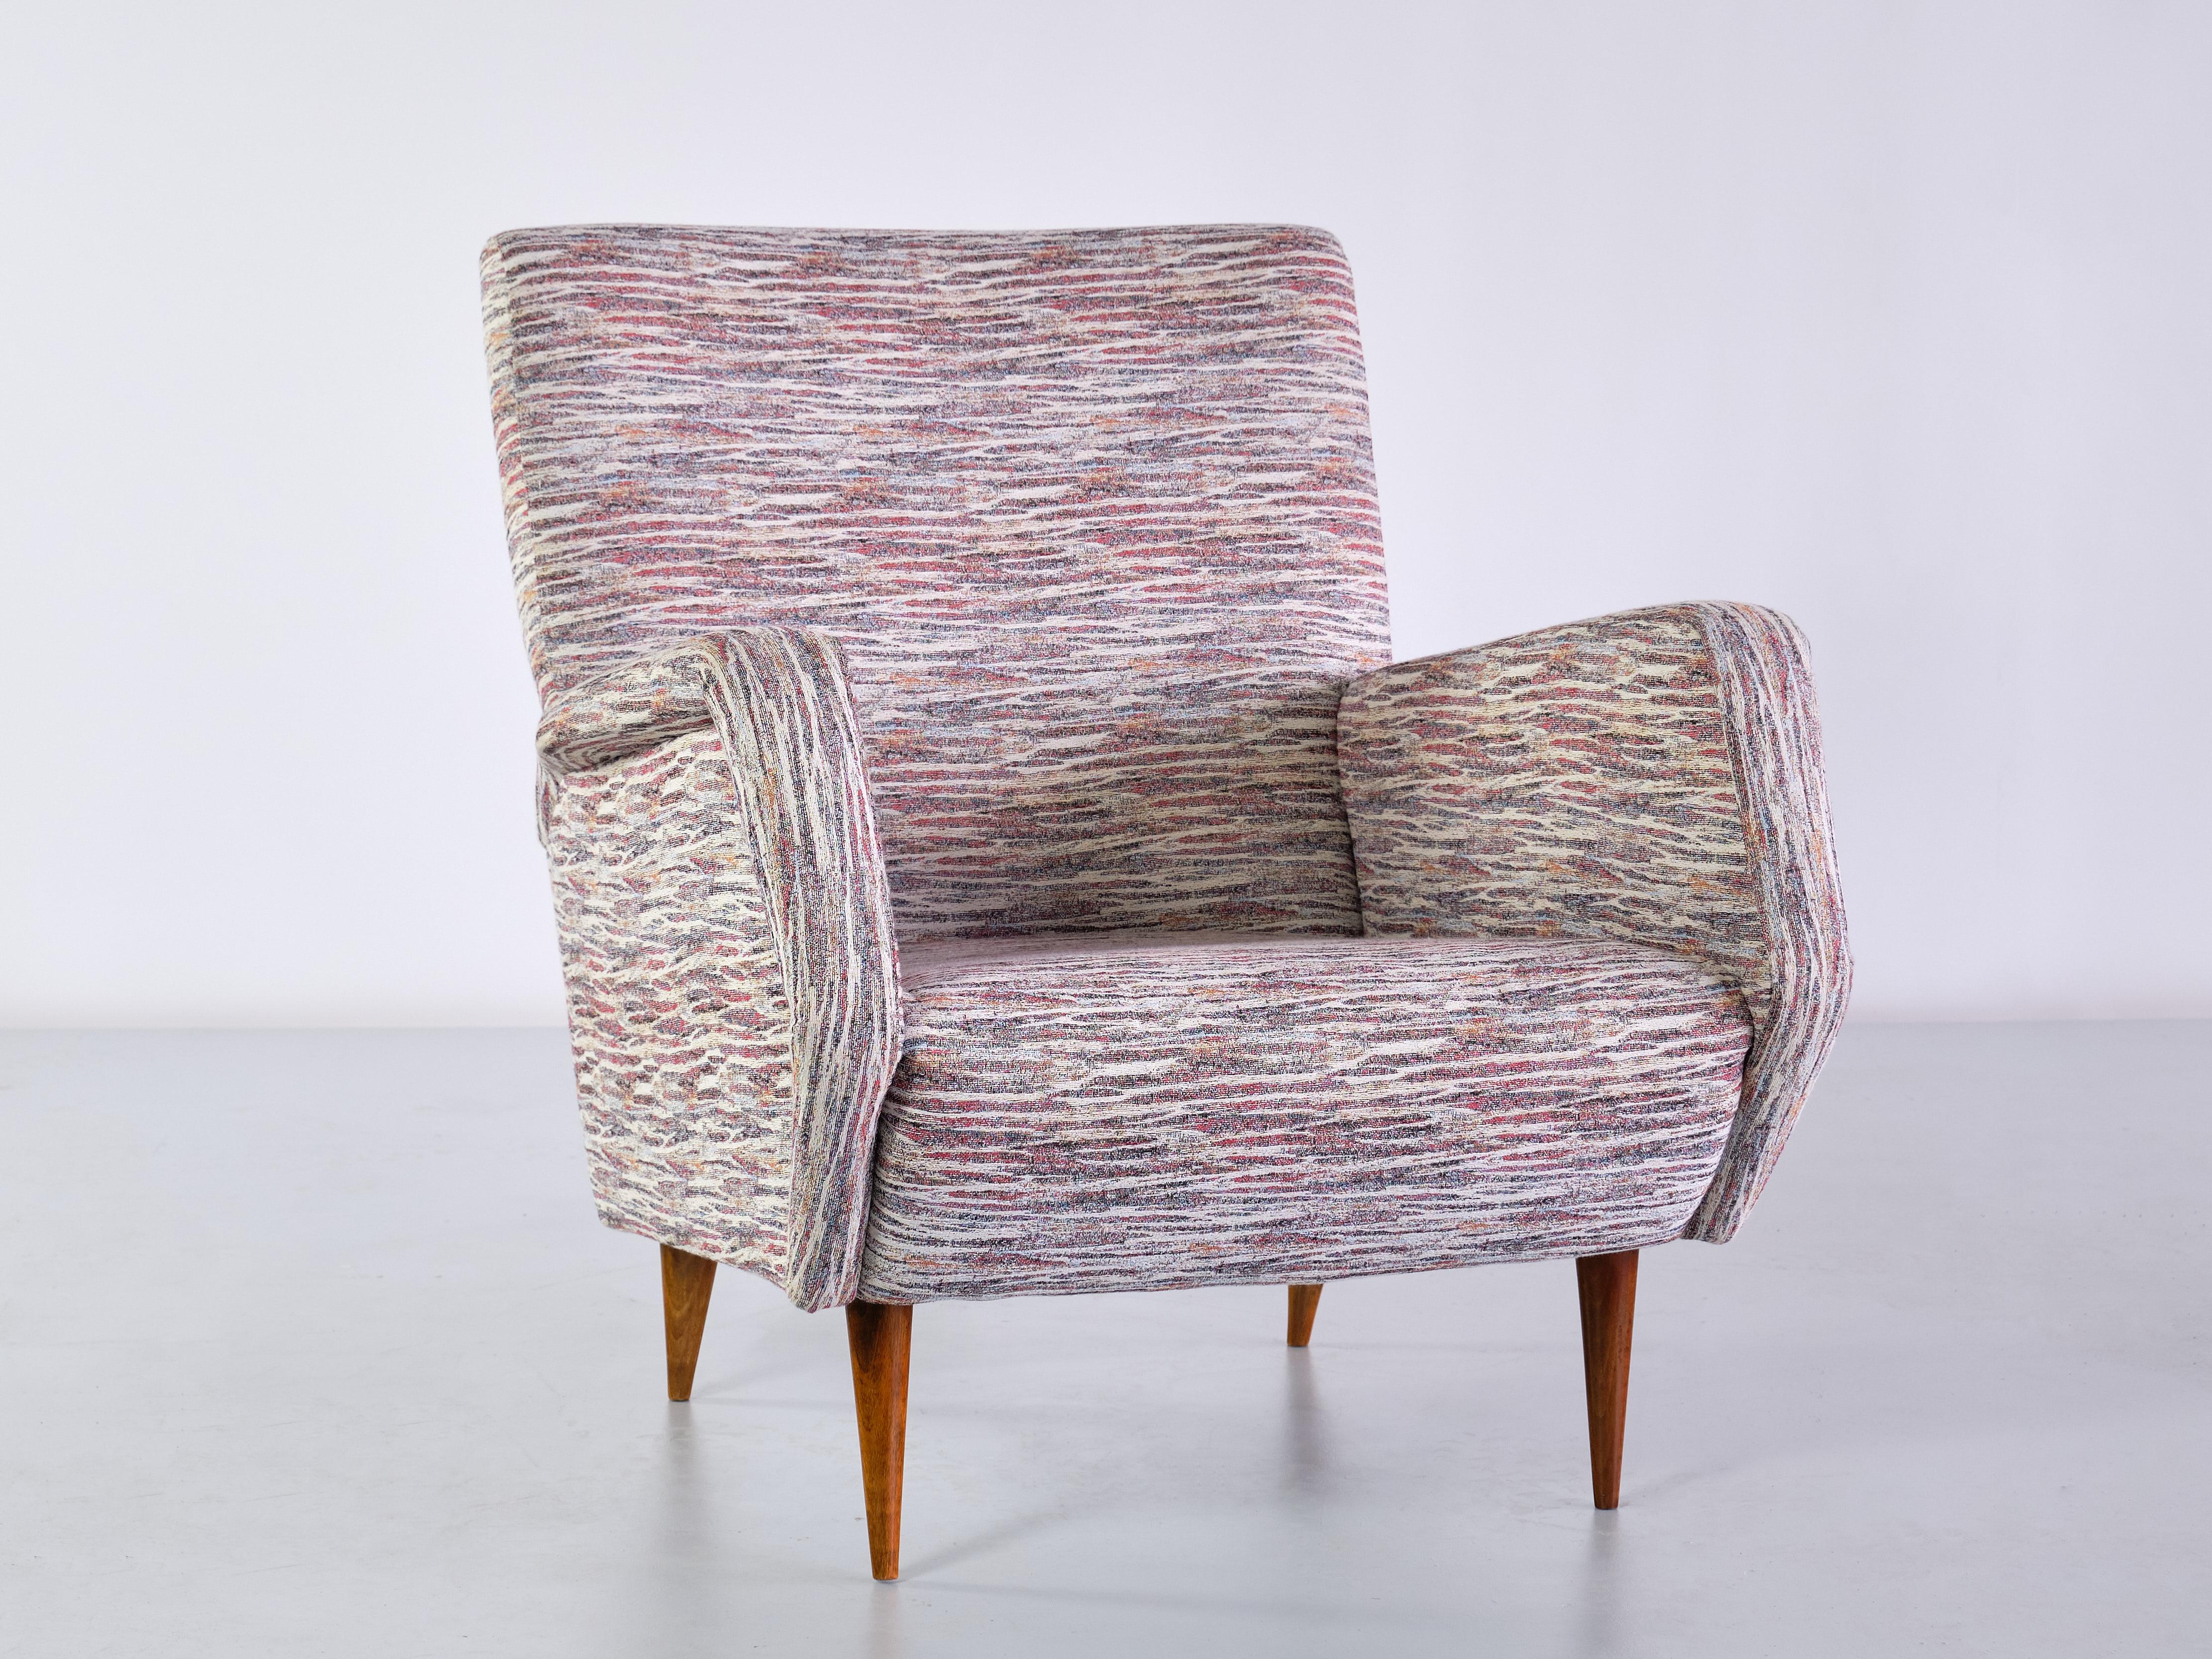 This rare armchair was designed by Gio Ponti and produced by Cassina, Italy in 1954. The model was numbered 803 and is one of the most iconic and recognizable Ponti designs produced by Cassina in the 1950s. The design is marked by the slightly